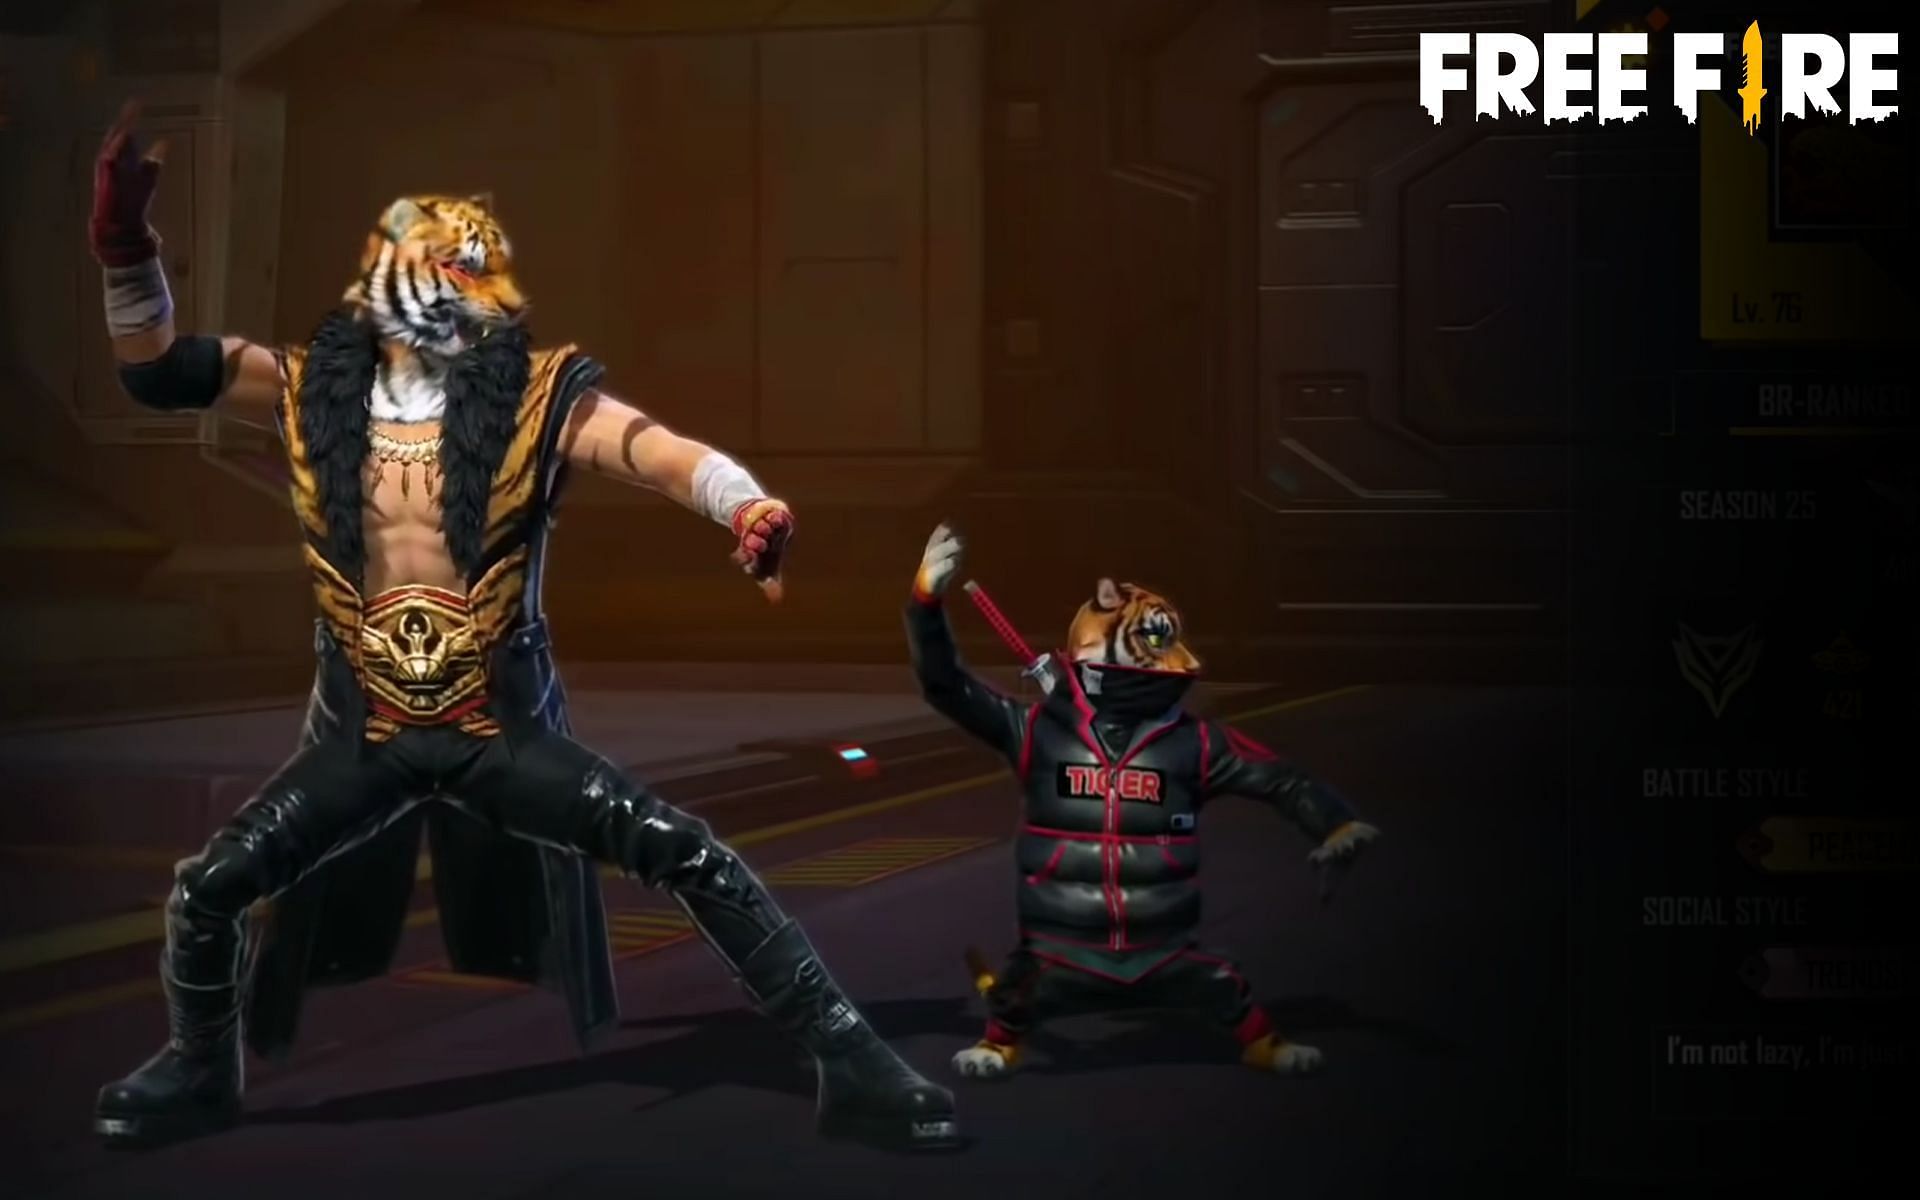 The emote in the top-up event is quite interesting and unique (Image via BrOkEn JoYsTiCk / YouTube)